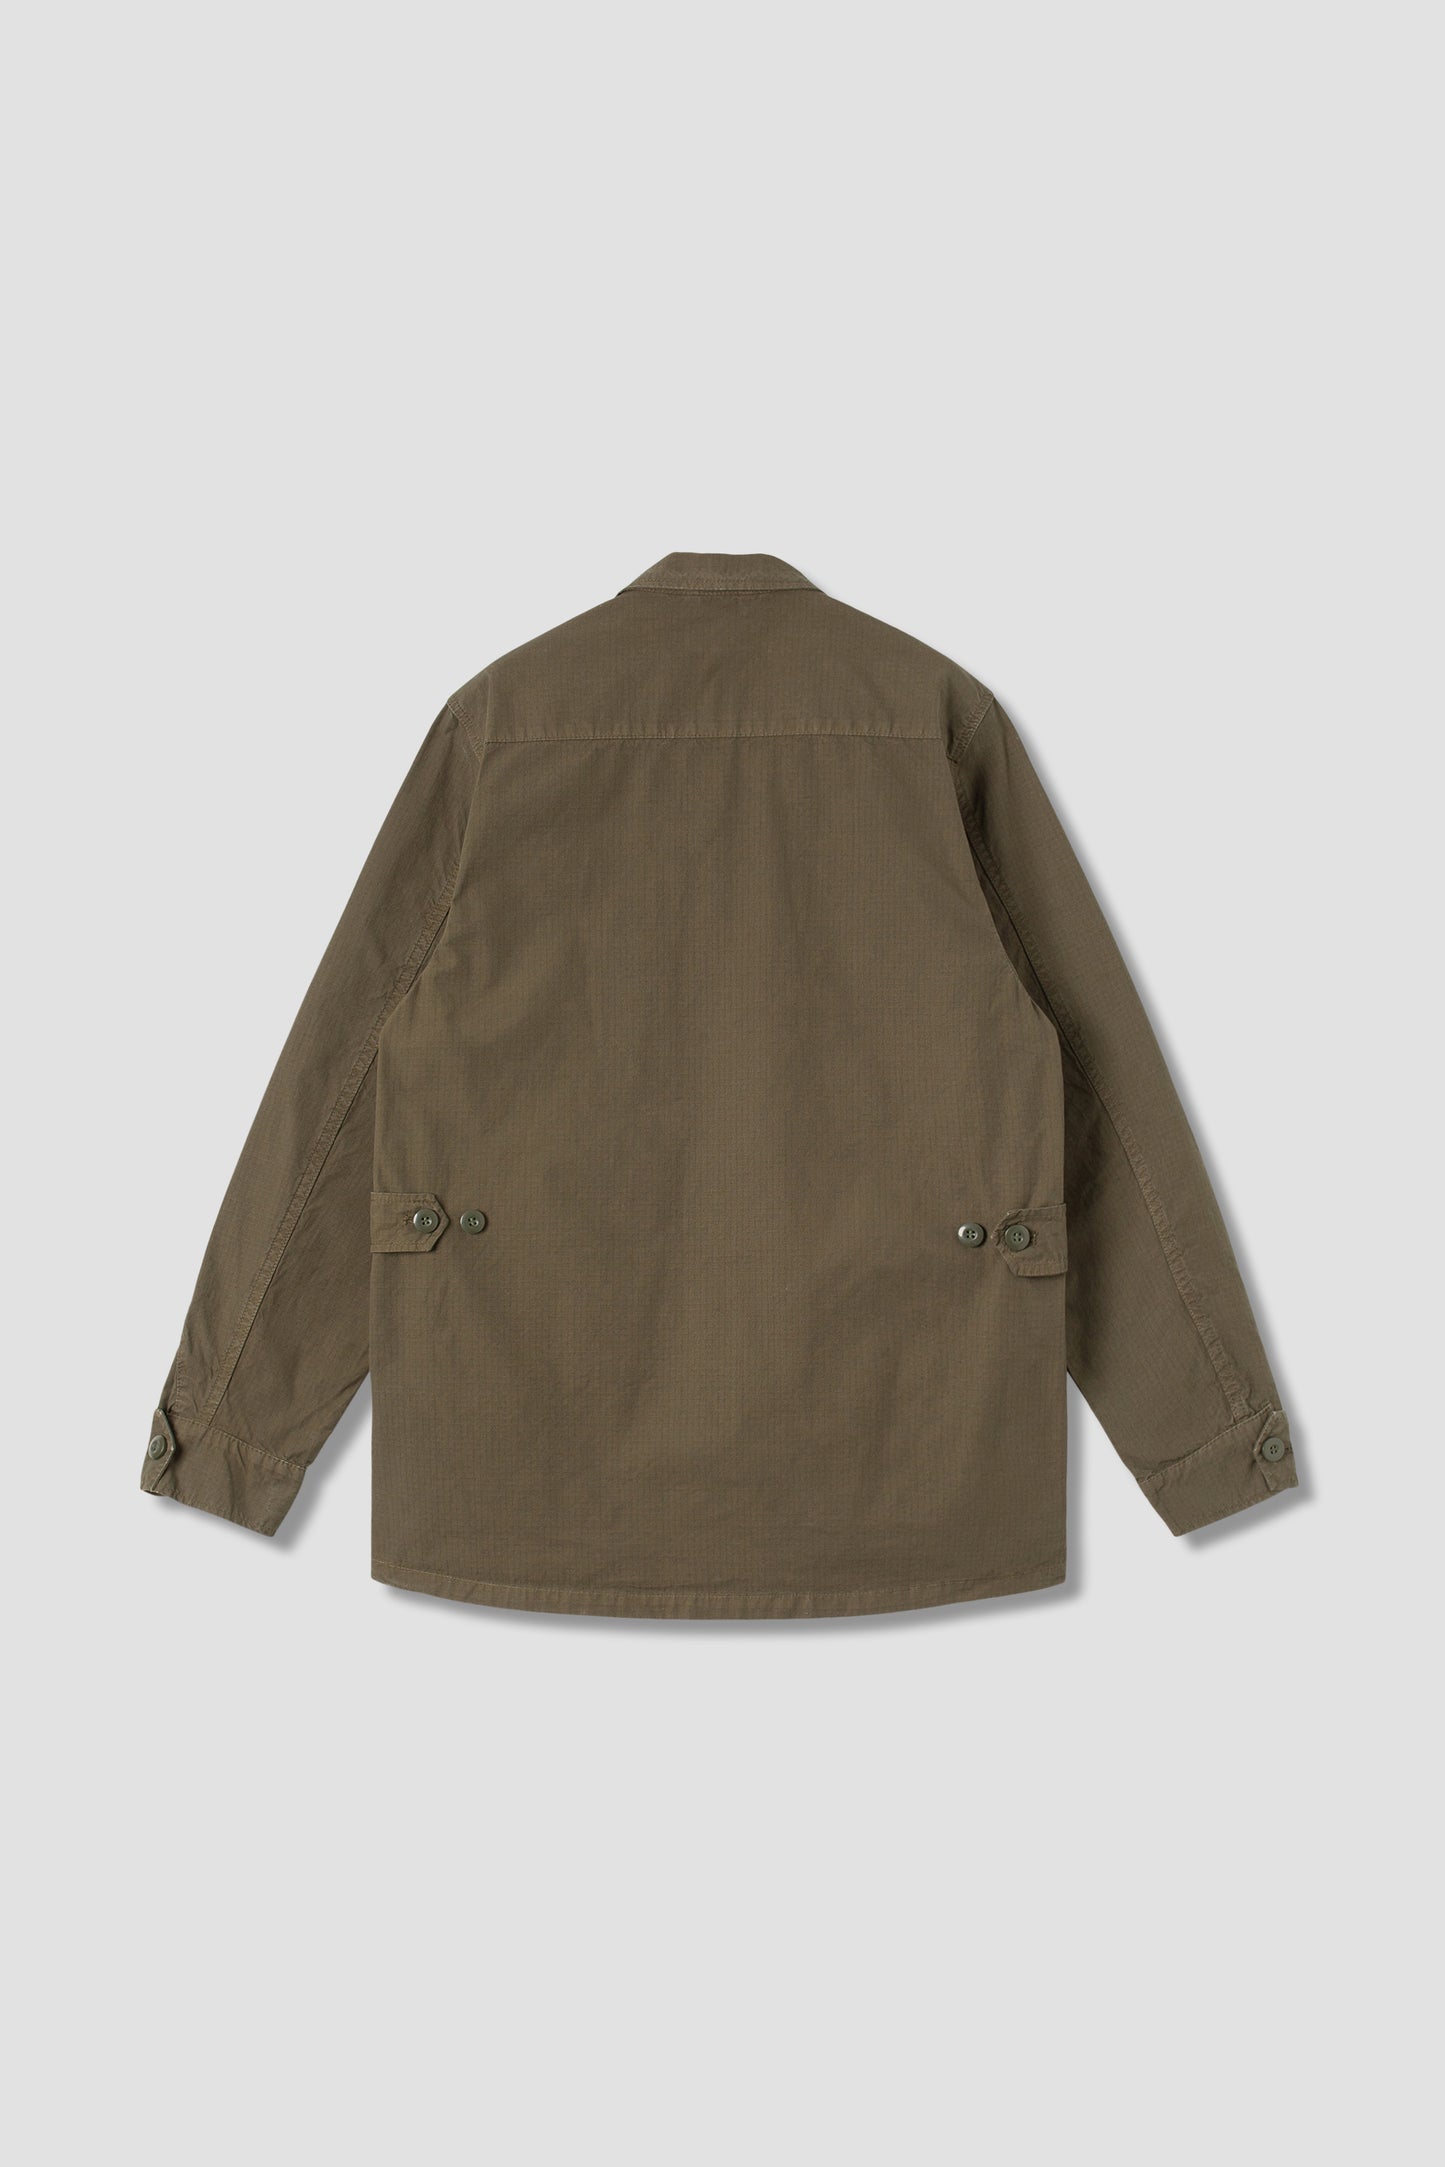 Tropical Jacket (Olive Ripstop)